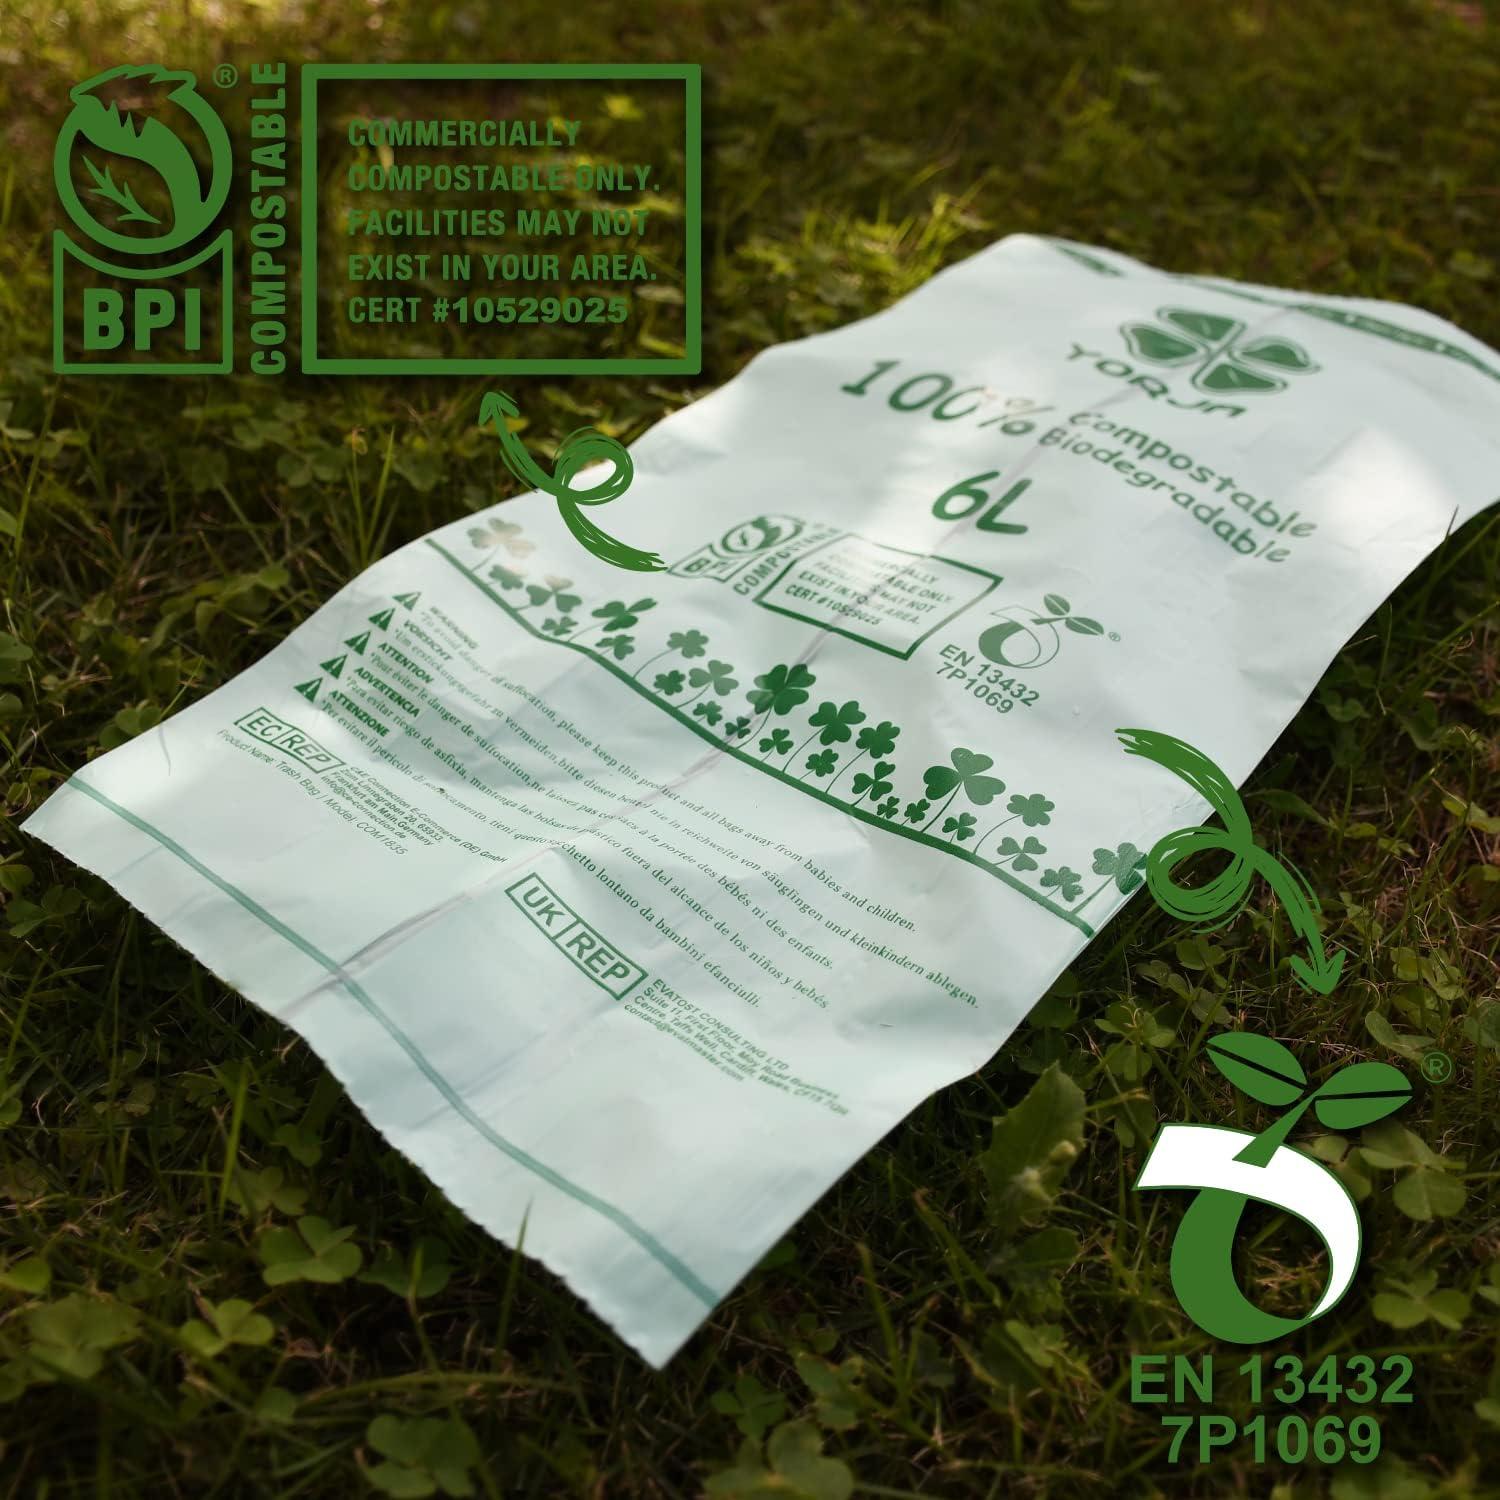 1.6 Gallon, 6 Liter, Compostable Bags with Handles